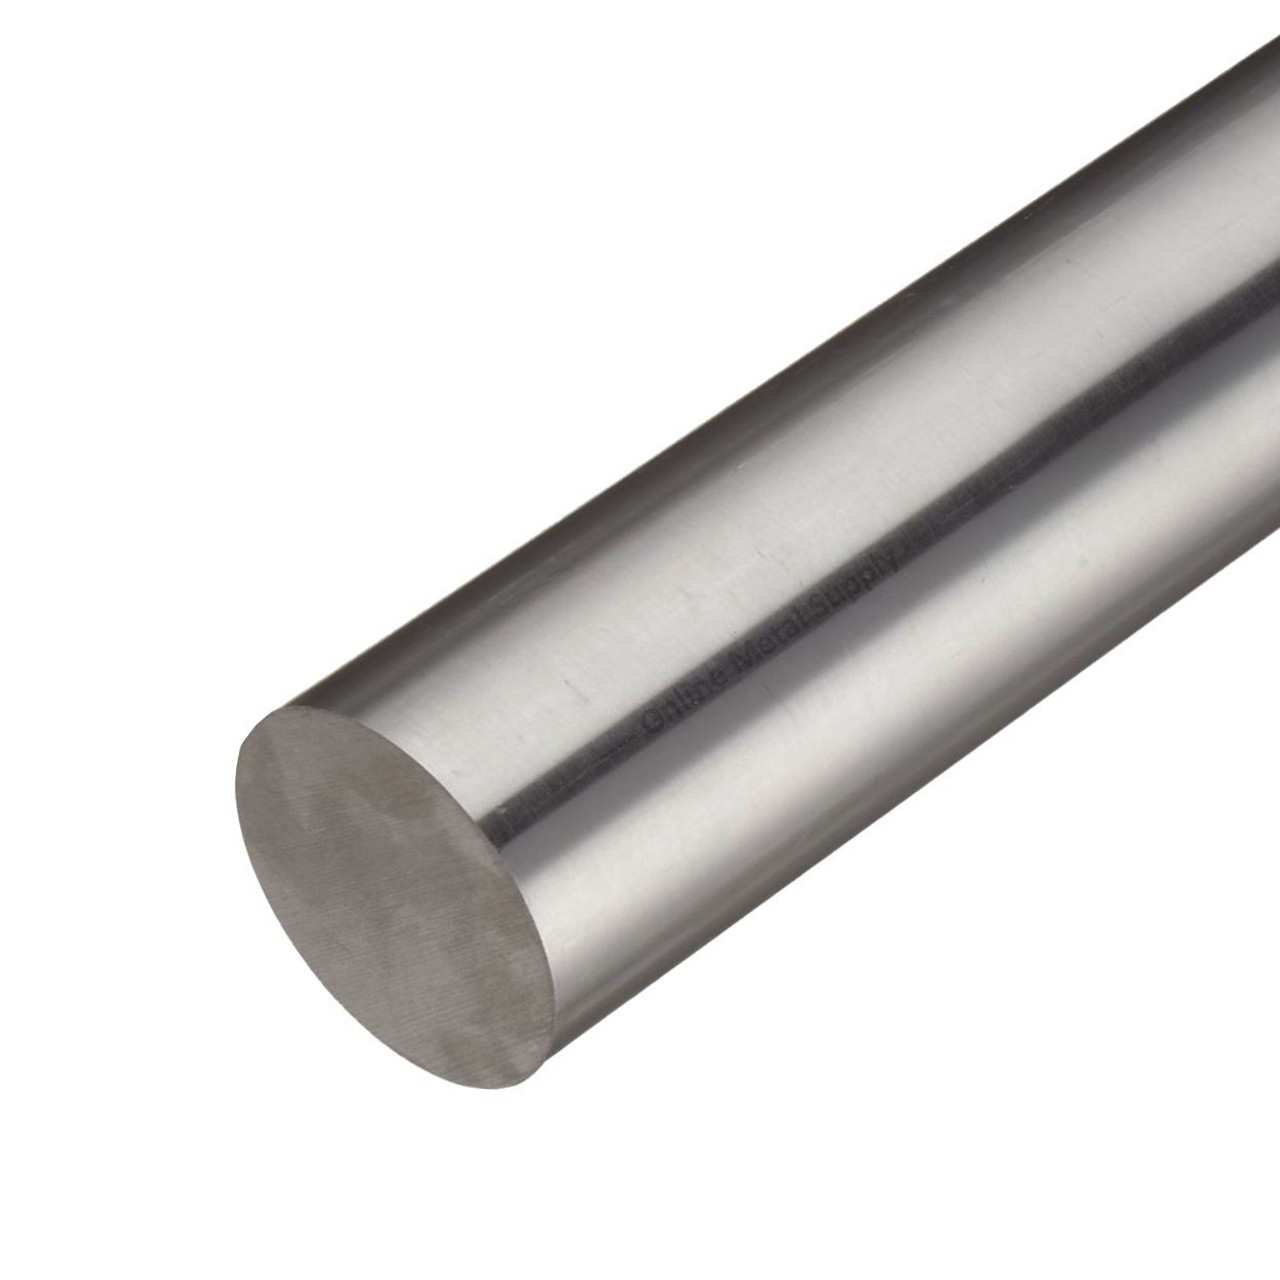 0.635 inch x 12 inches, 8620 Alloy Steel Round Rod, Turned, Ground, Polished